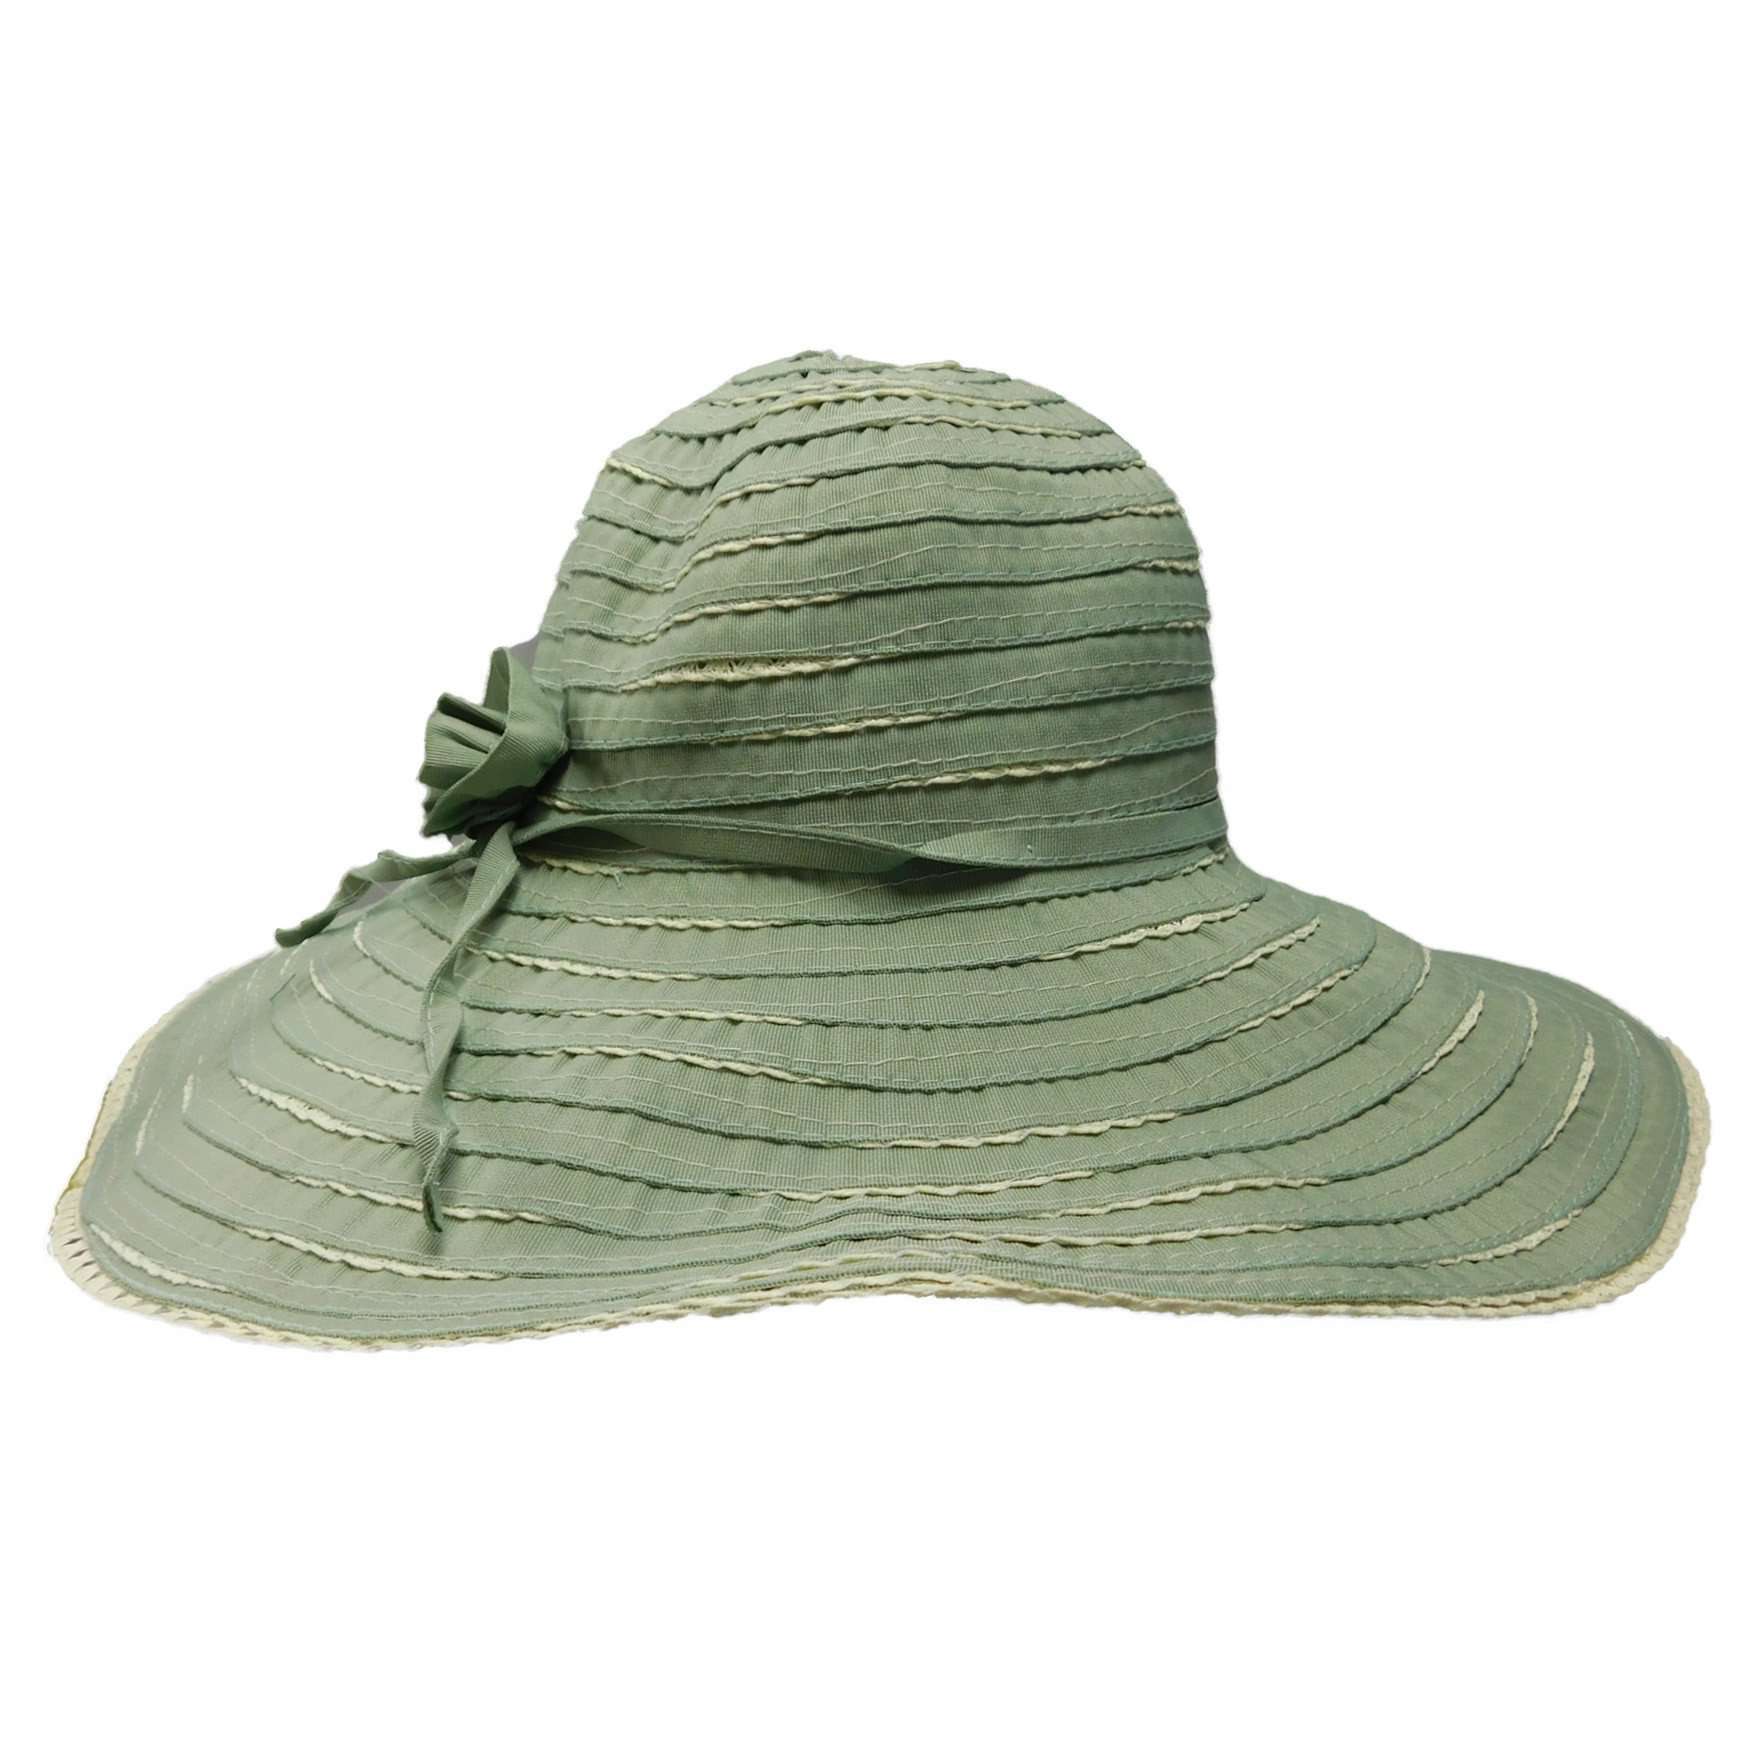 Spiral Sewn Ribbon and Straw Sun Hat by JSA for Women Floppy Hat Jeanne Simmons WSPS466GN Green  